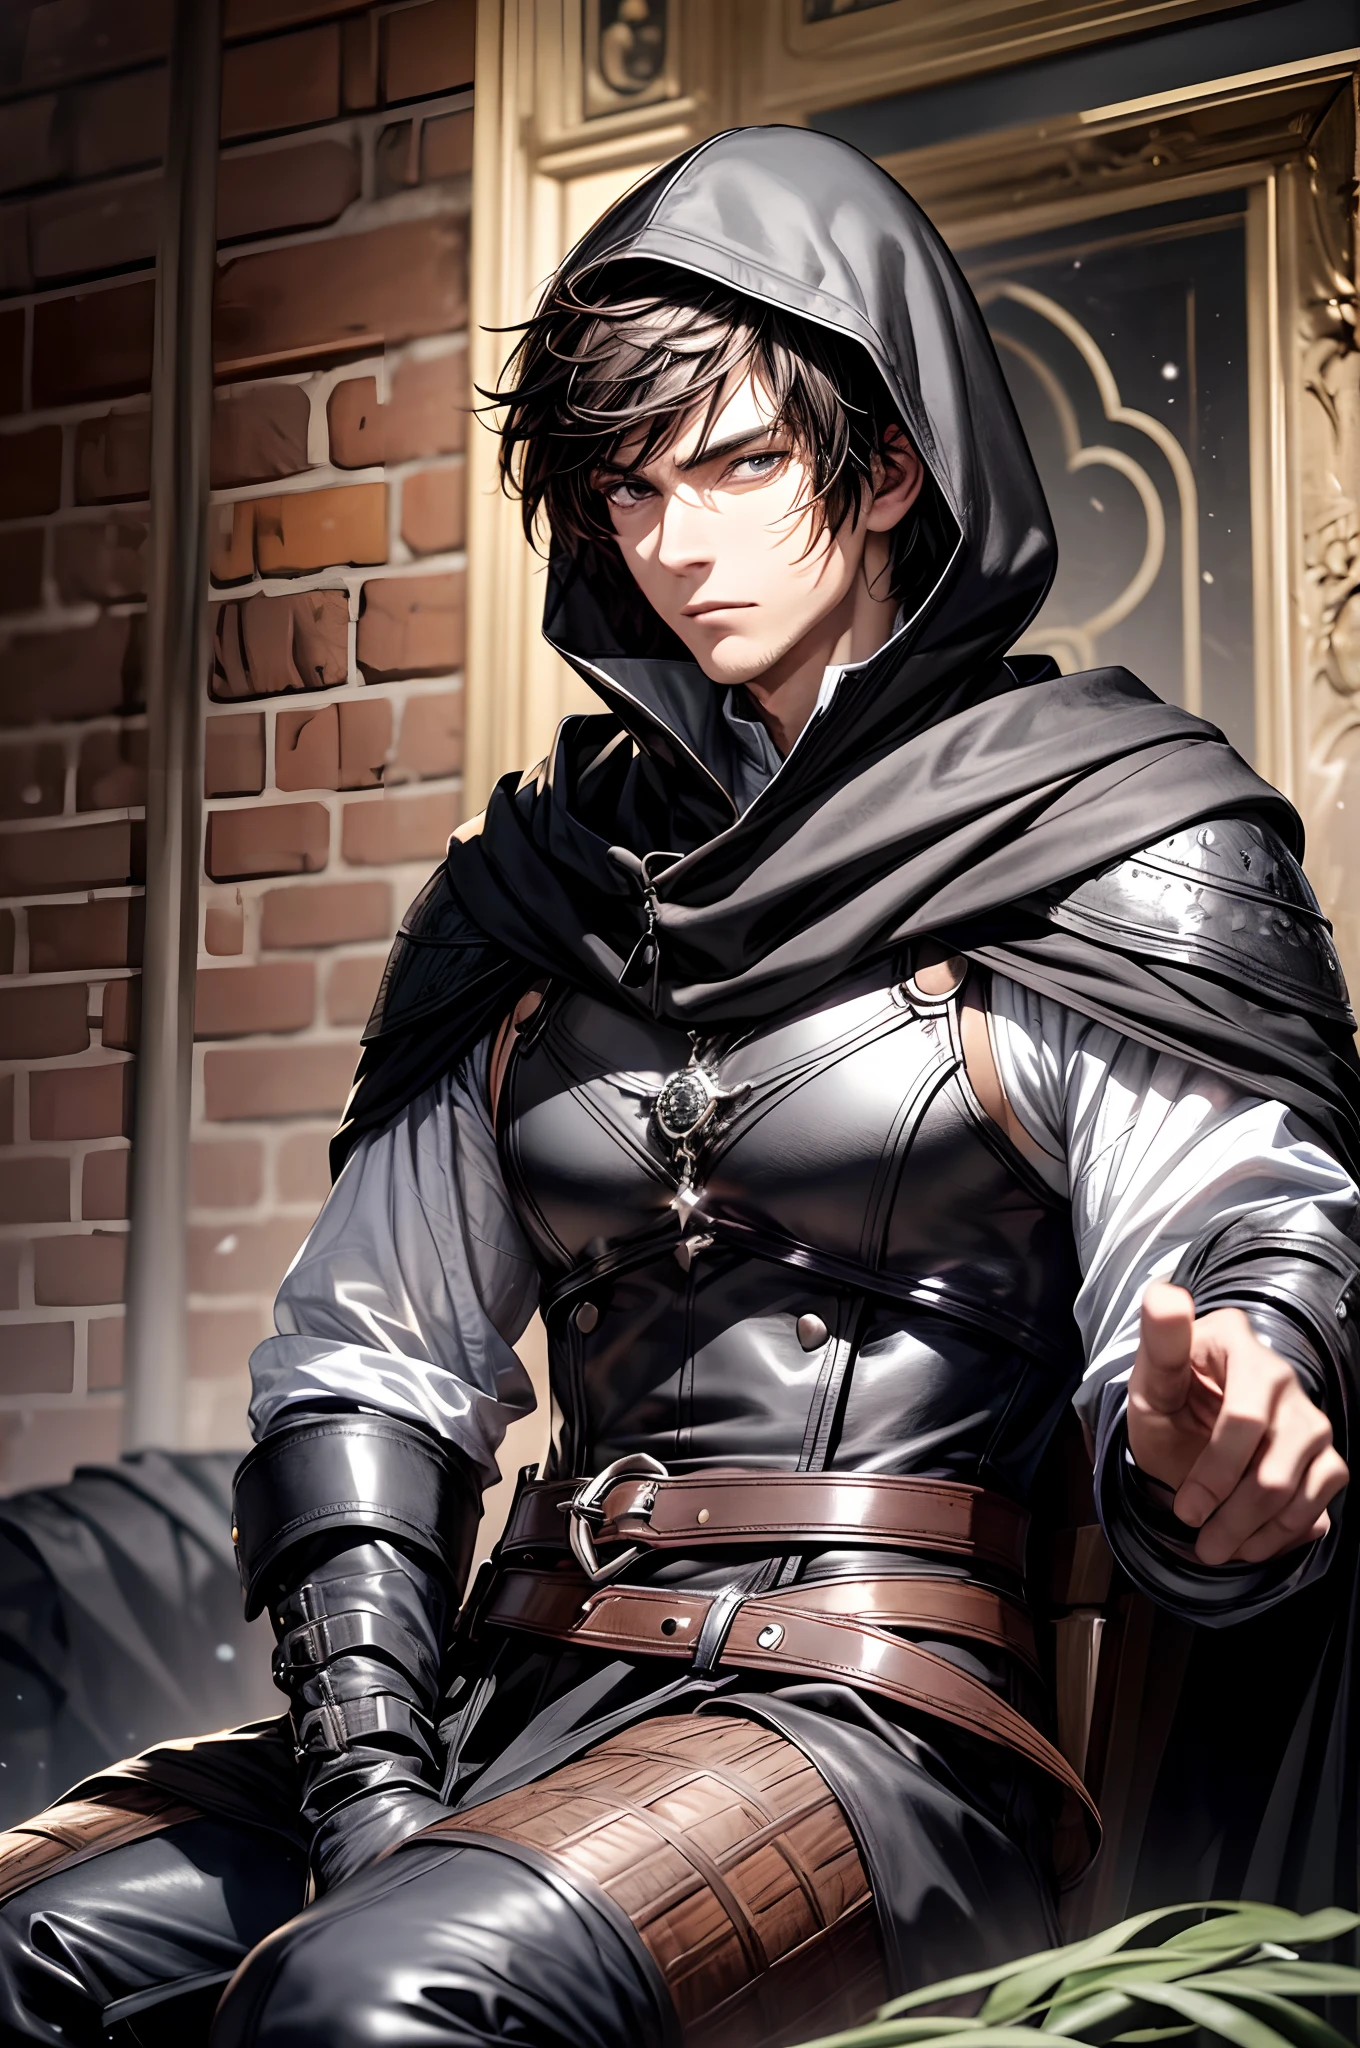 (absurderes, hight resolution, ultra-detailliert), 1 male, Adult, Handsome, High muscular face, broad shoulders, finely detailed eyes, Short black hair, Brown eyes, Black cloak, Wearing a hood, Leather Vest, Leather bag at waist............................., 2 daggers on the belt, castle, Medieval atmosphere, Natural Light and Shadow, Bright particles fly around a person, Fantastic, Mysterious, Bright glow,  Seated Pose, Serious expression, Cold, thoughtful, Mouth Shut